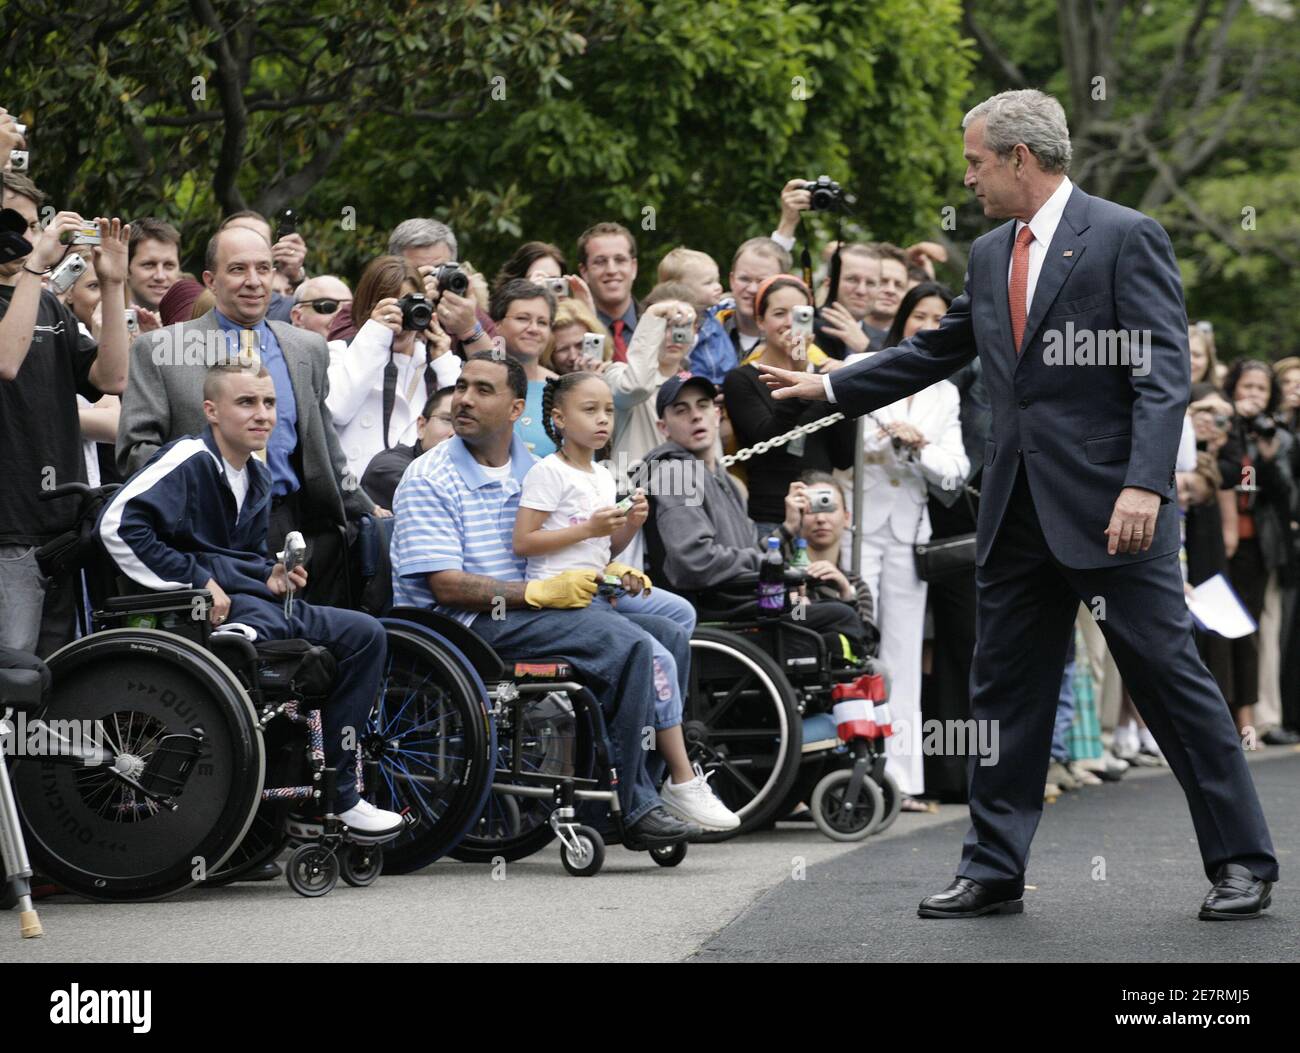 U.S. President George W. Bush (R) greets soldiers wounded in Iraq who are warded at Walter Reed Medical center on the South Lawn of the White House in Washington before his departure May 18, 2007. Bush is going to attend a Republican Party in Richmond, Virginia and spend weekend at his ranch in Crawford, Texas. REUTERS/Yuri Gripas (UNITED STATES) Stock Photo